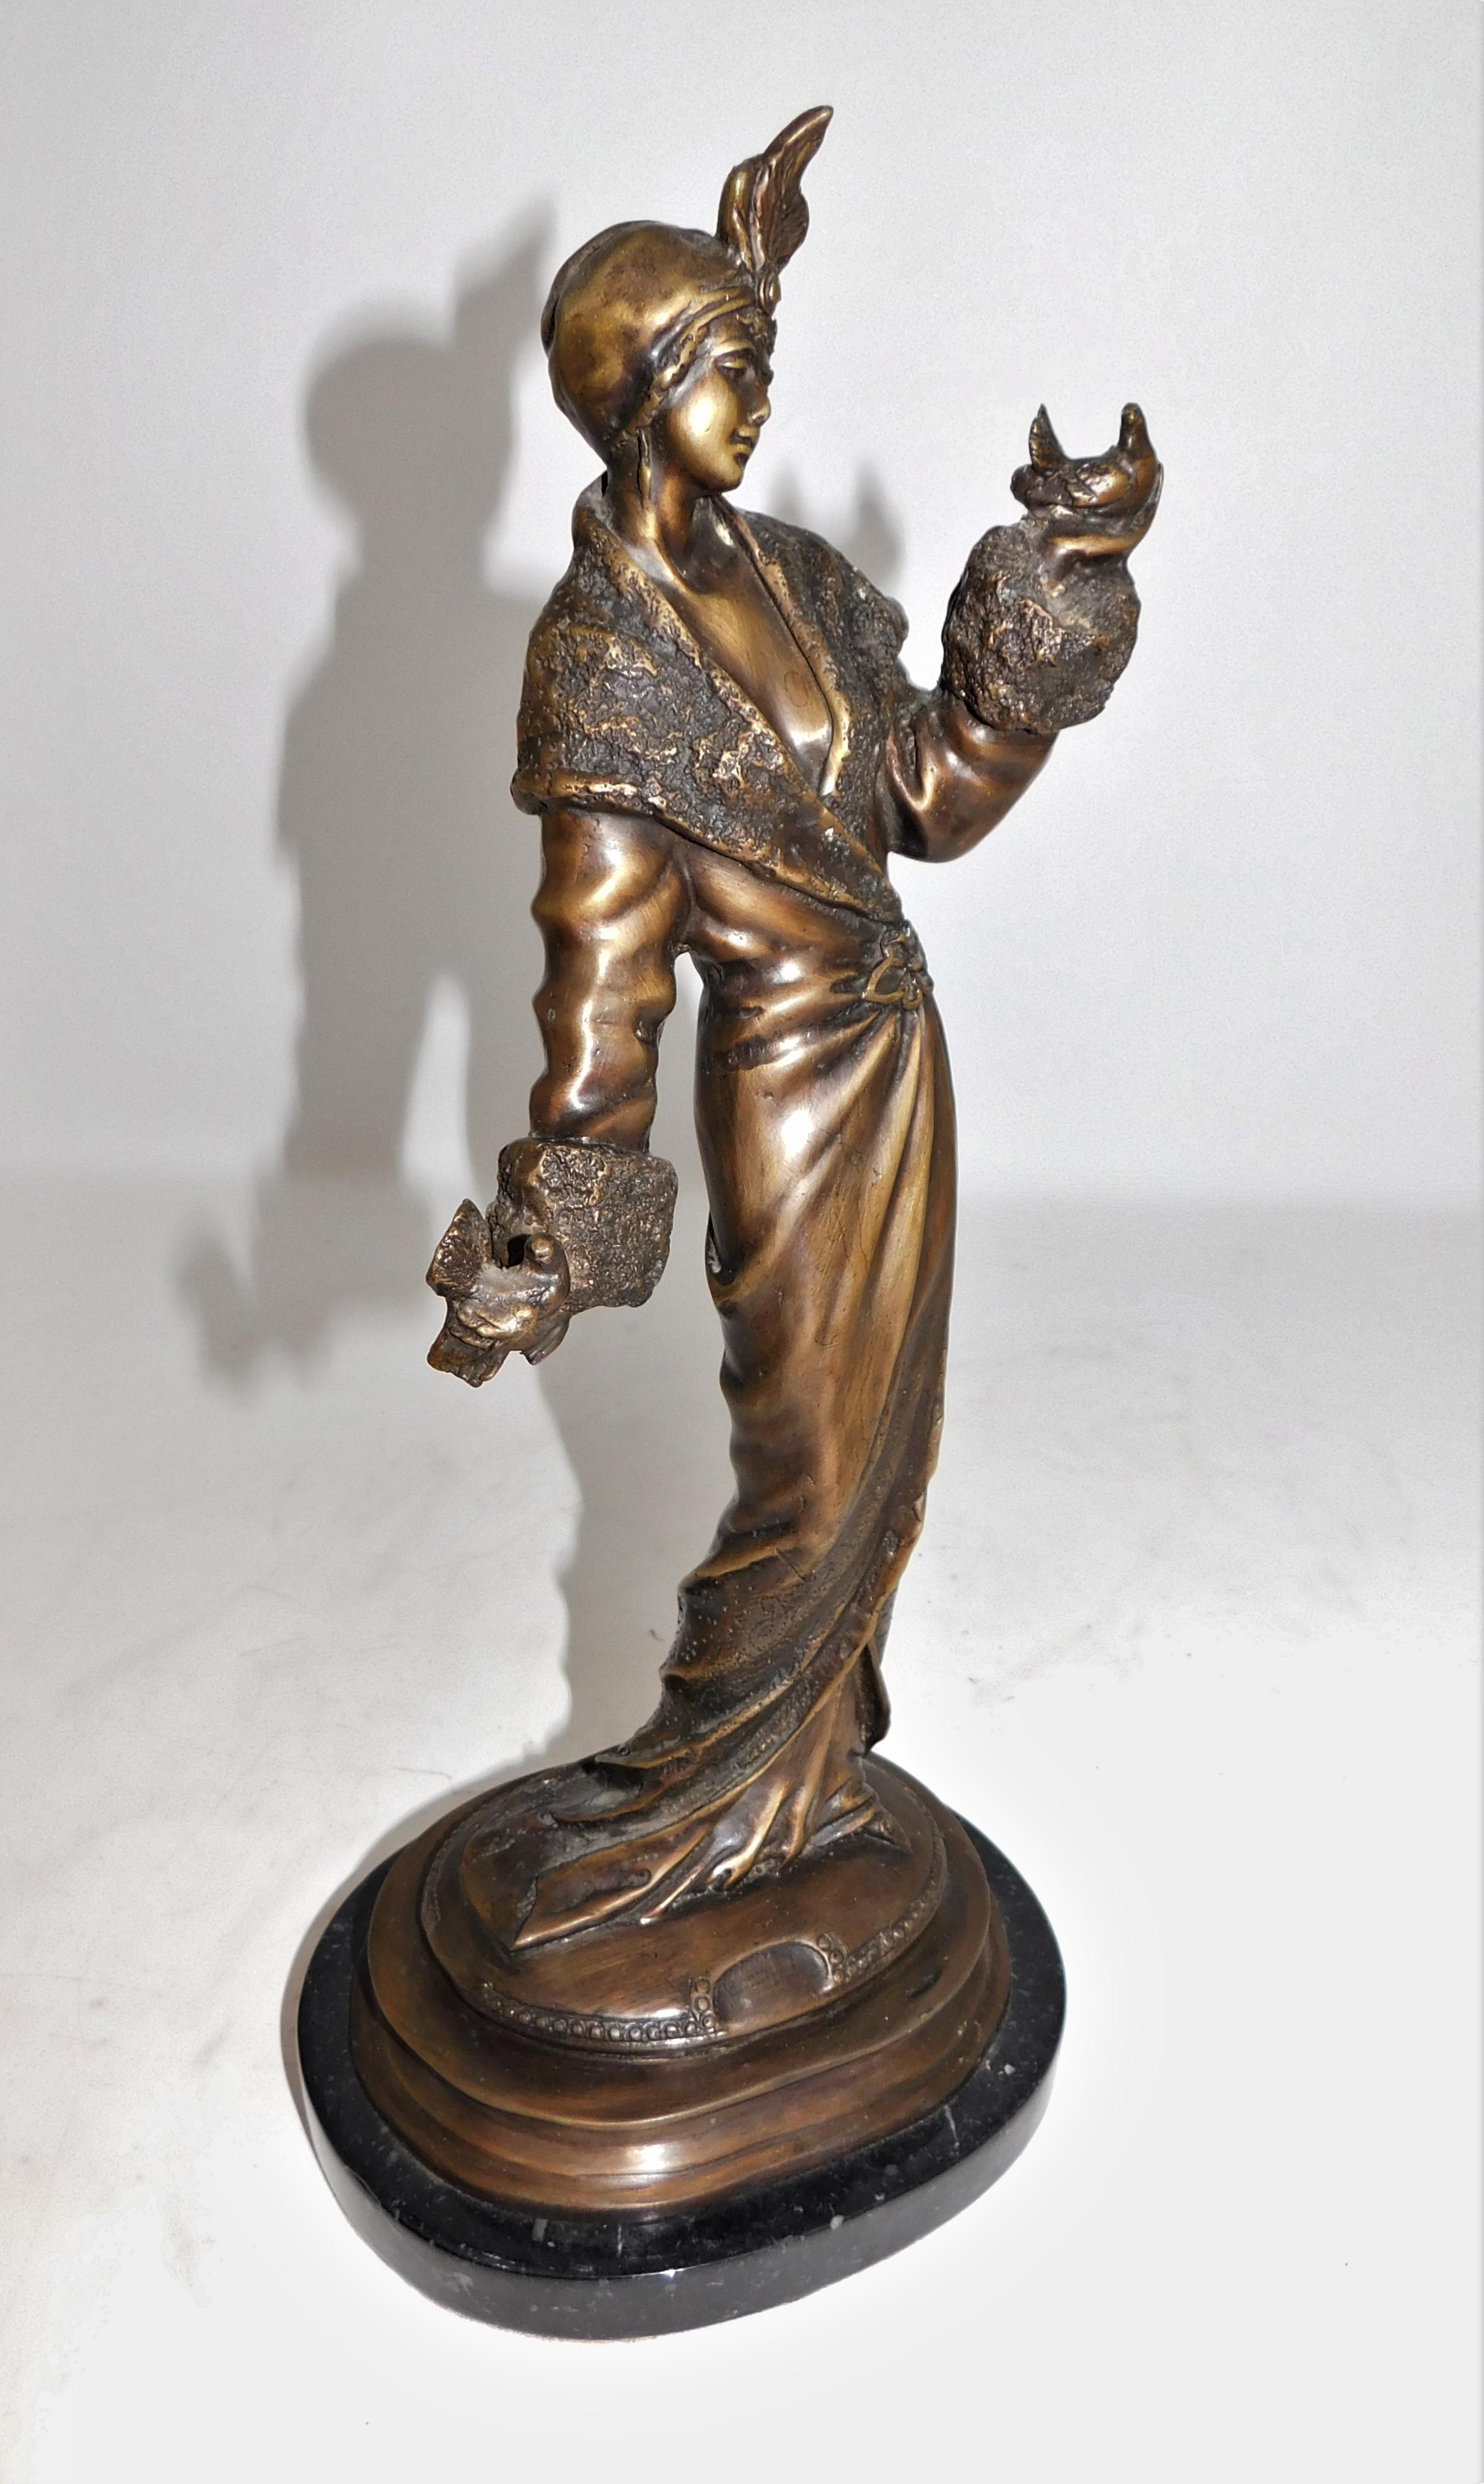 Beautiful bronze Art Nouveau/Art Deco figurine sculpture woman in a long flowing 1920's dress with doves on a marble base.  Unsigned but well crafted with intricate details standing 15 inches high.
